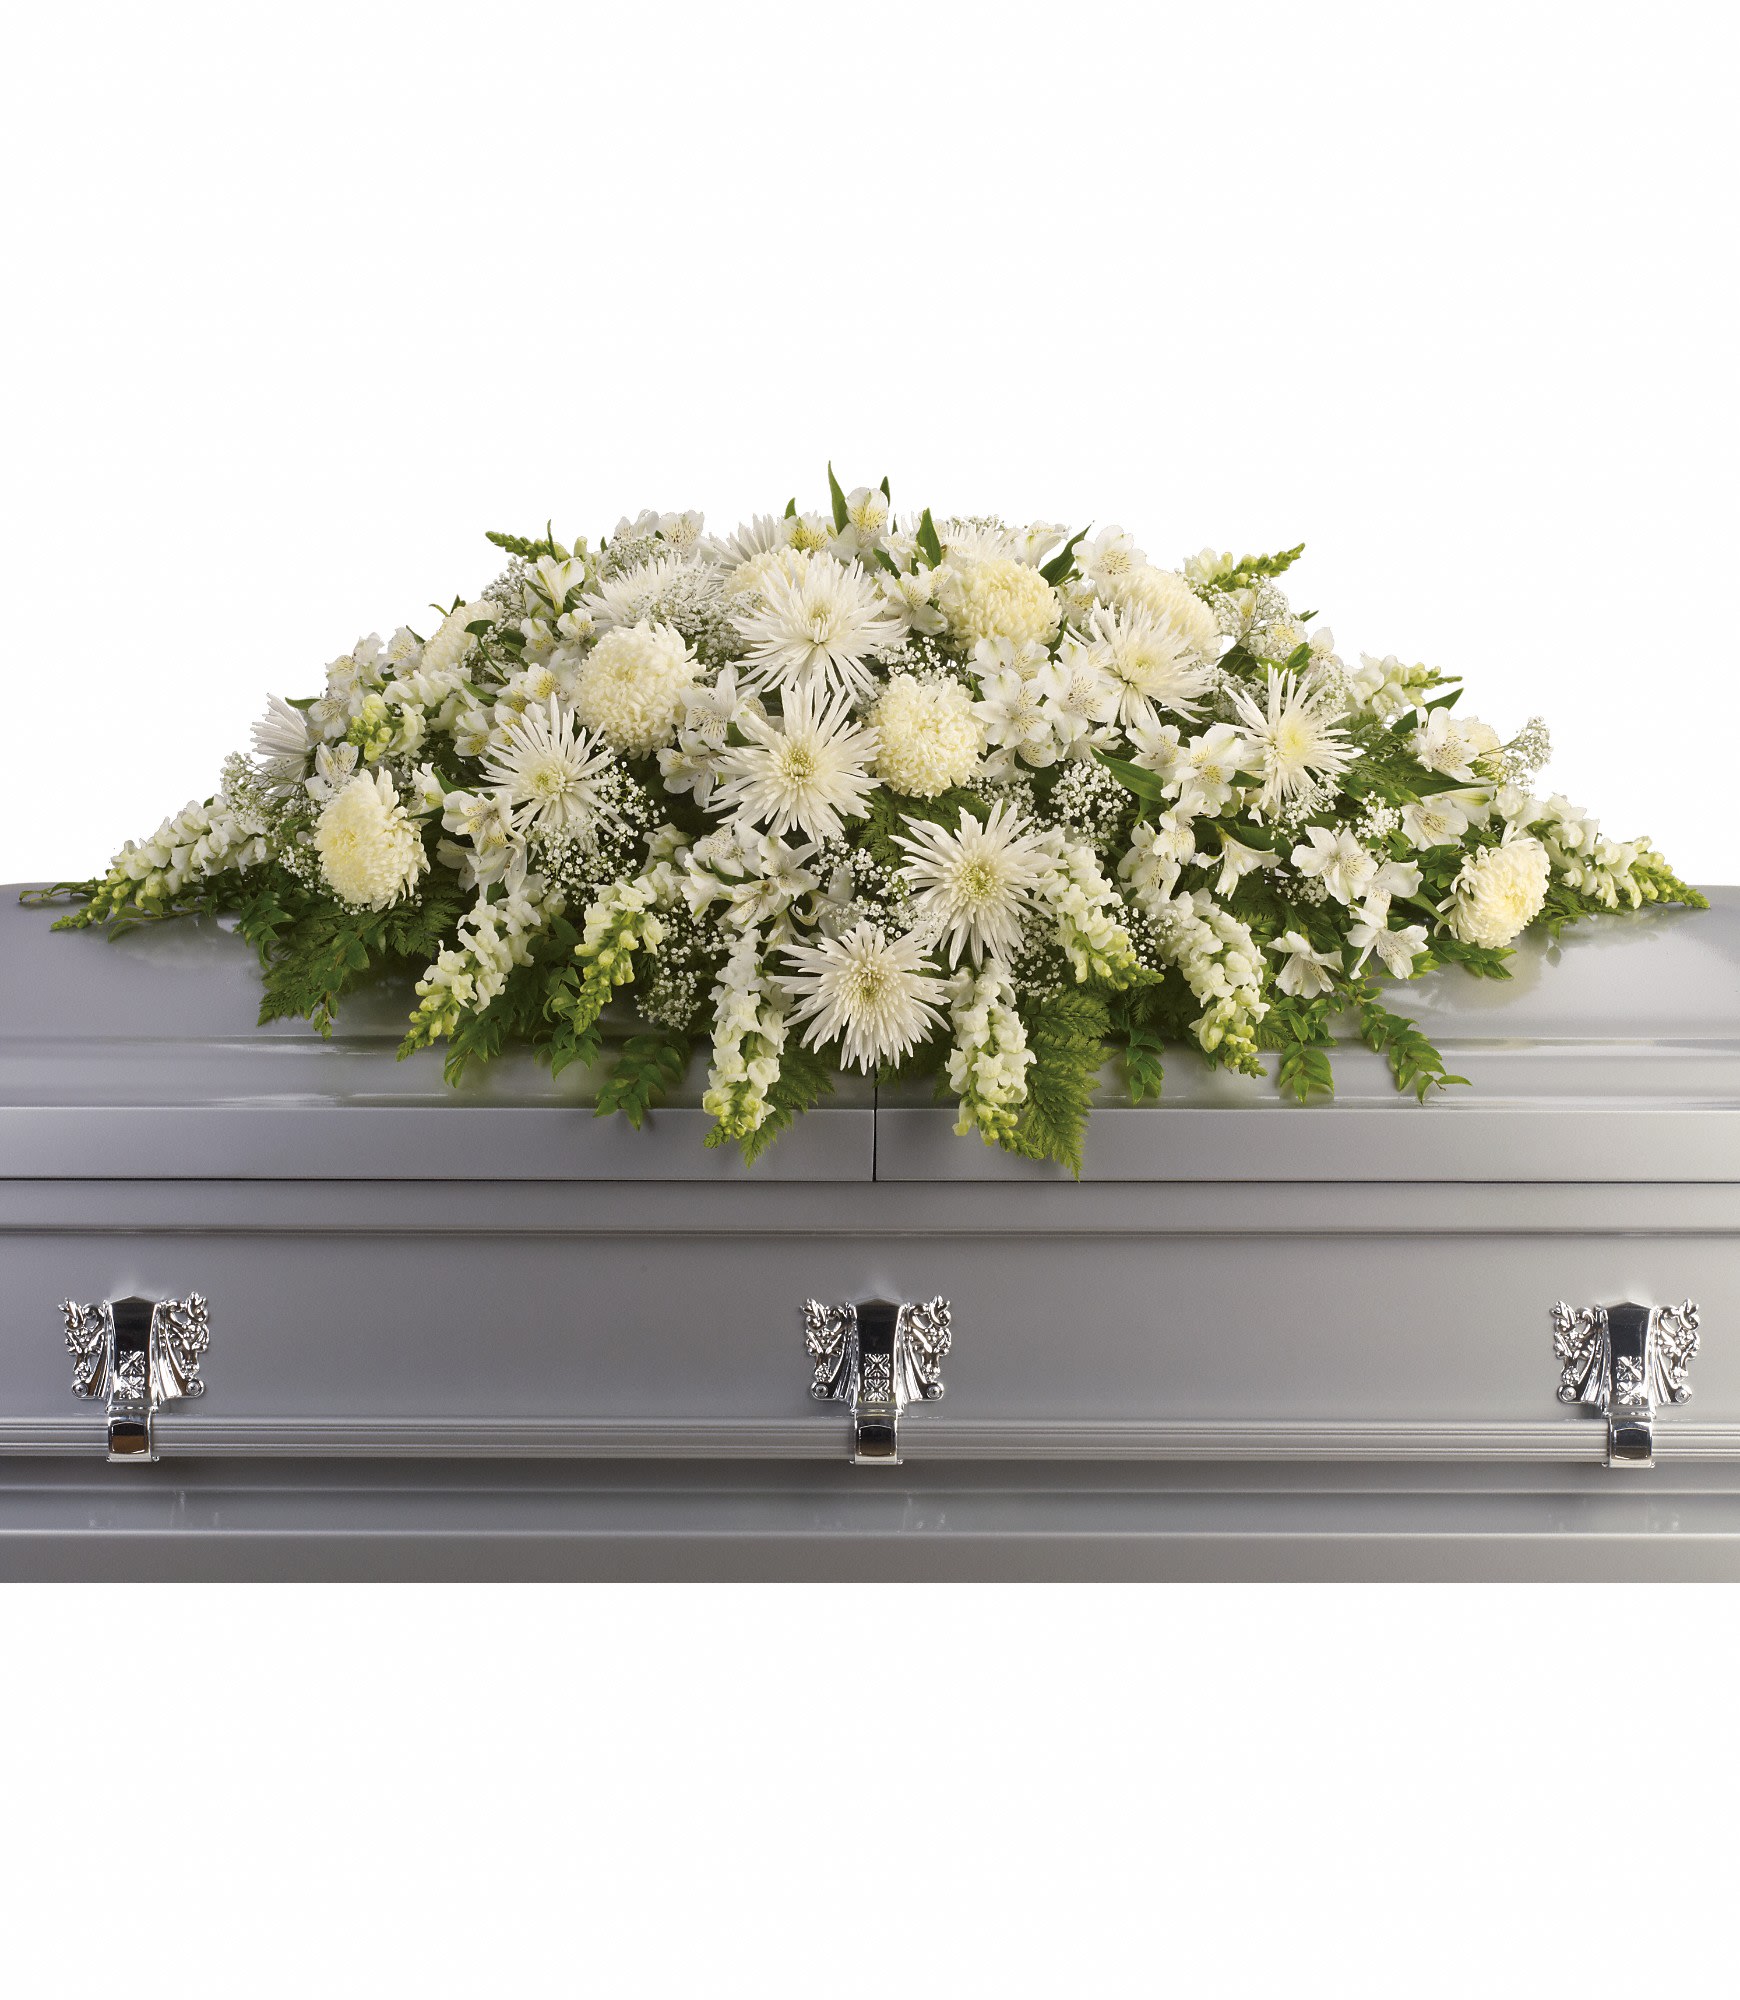 Enduring Light Casket Spray by Teleflora - The purity of this all-white casket spray creates an aura of serenity and peace - a beautifully memorable final farewell to a lost loved one.  